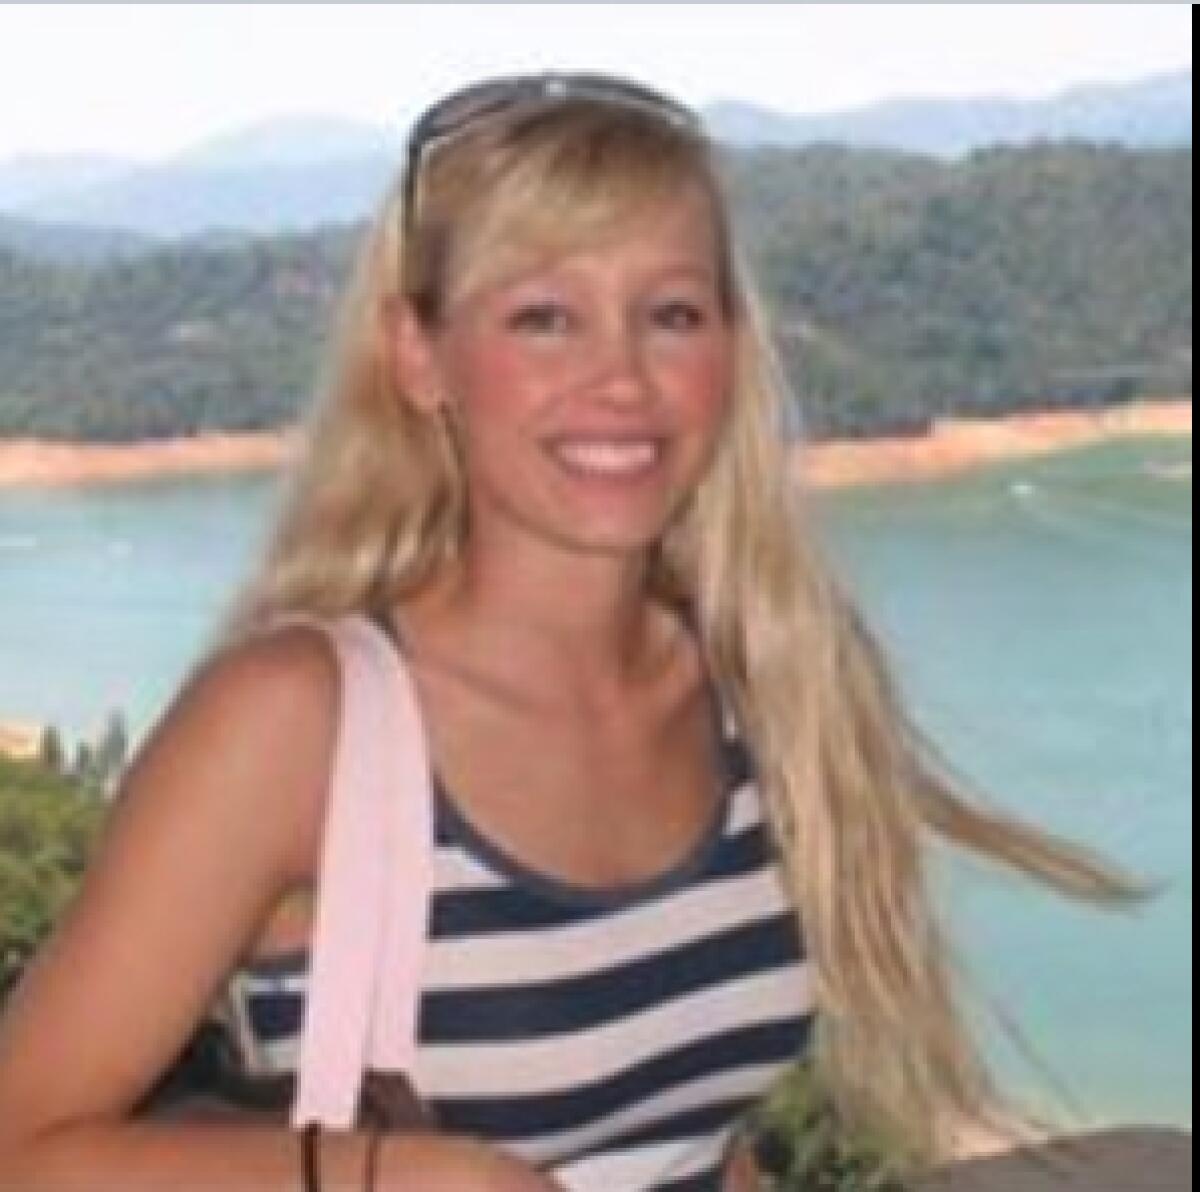 A blond woman smiles for a photo in front of a lake